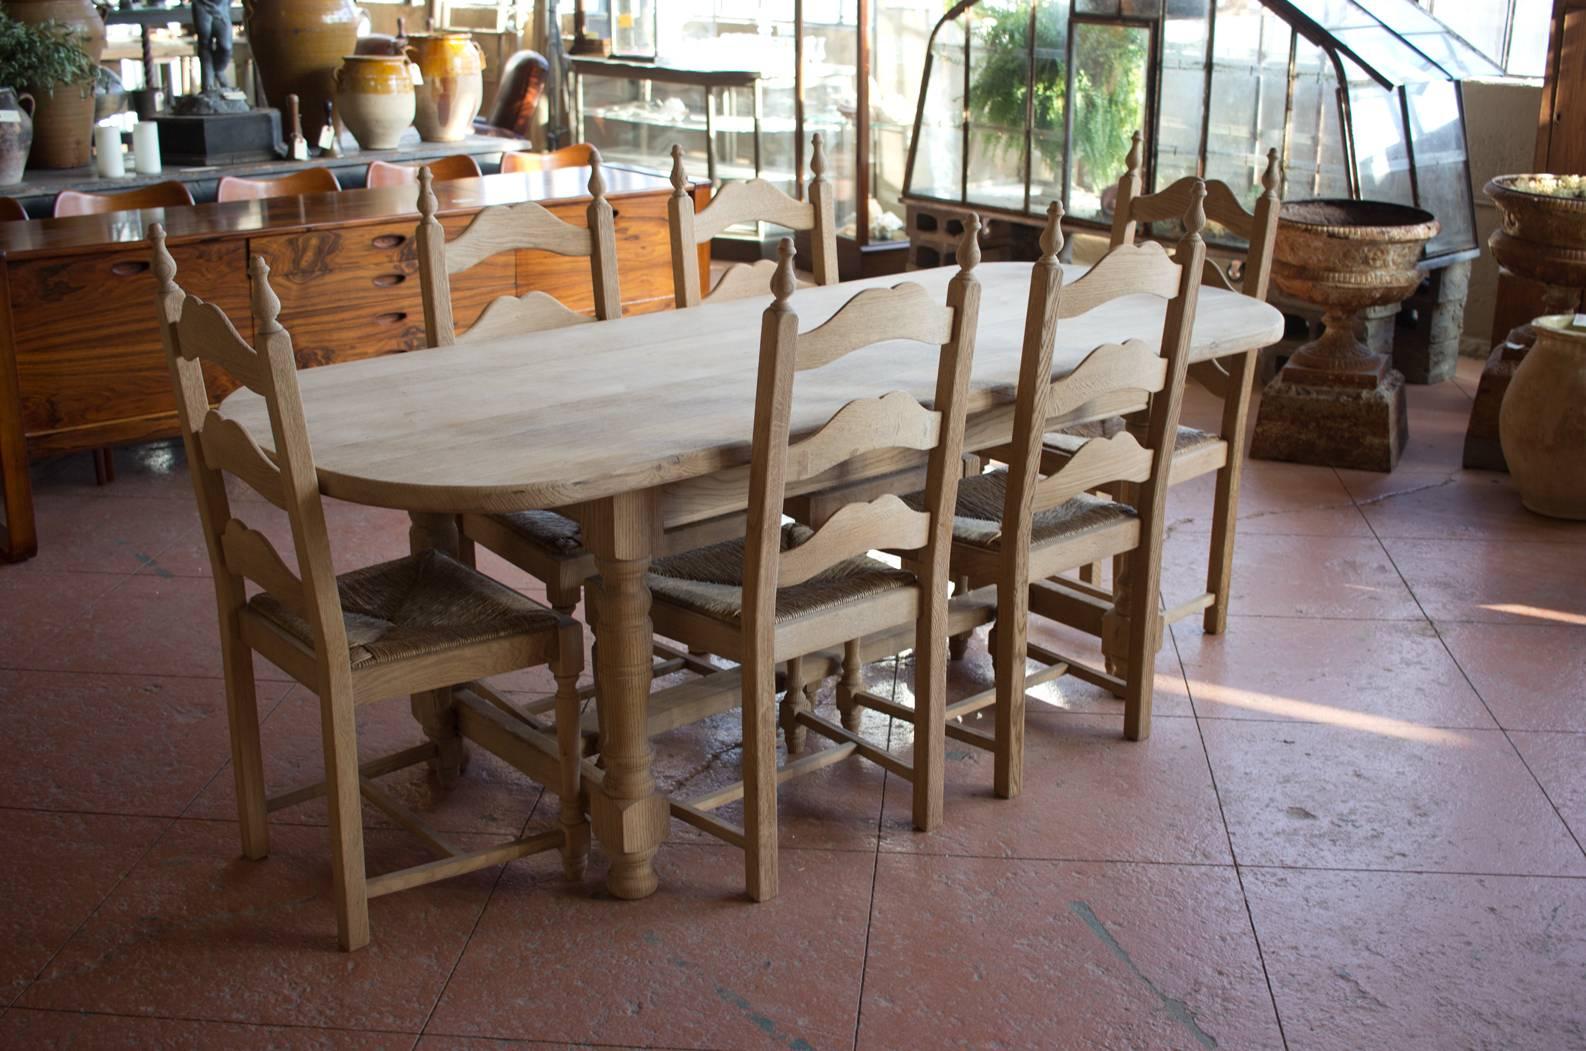 Fabulous quality French vintage stripped oak oval table with six rush seat ladder back chairs. Works beautifully with the French stripped oak buffet a deux corps listed.

Table dimensions: 30.0" tall x 84.0" long x 34.0"